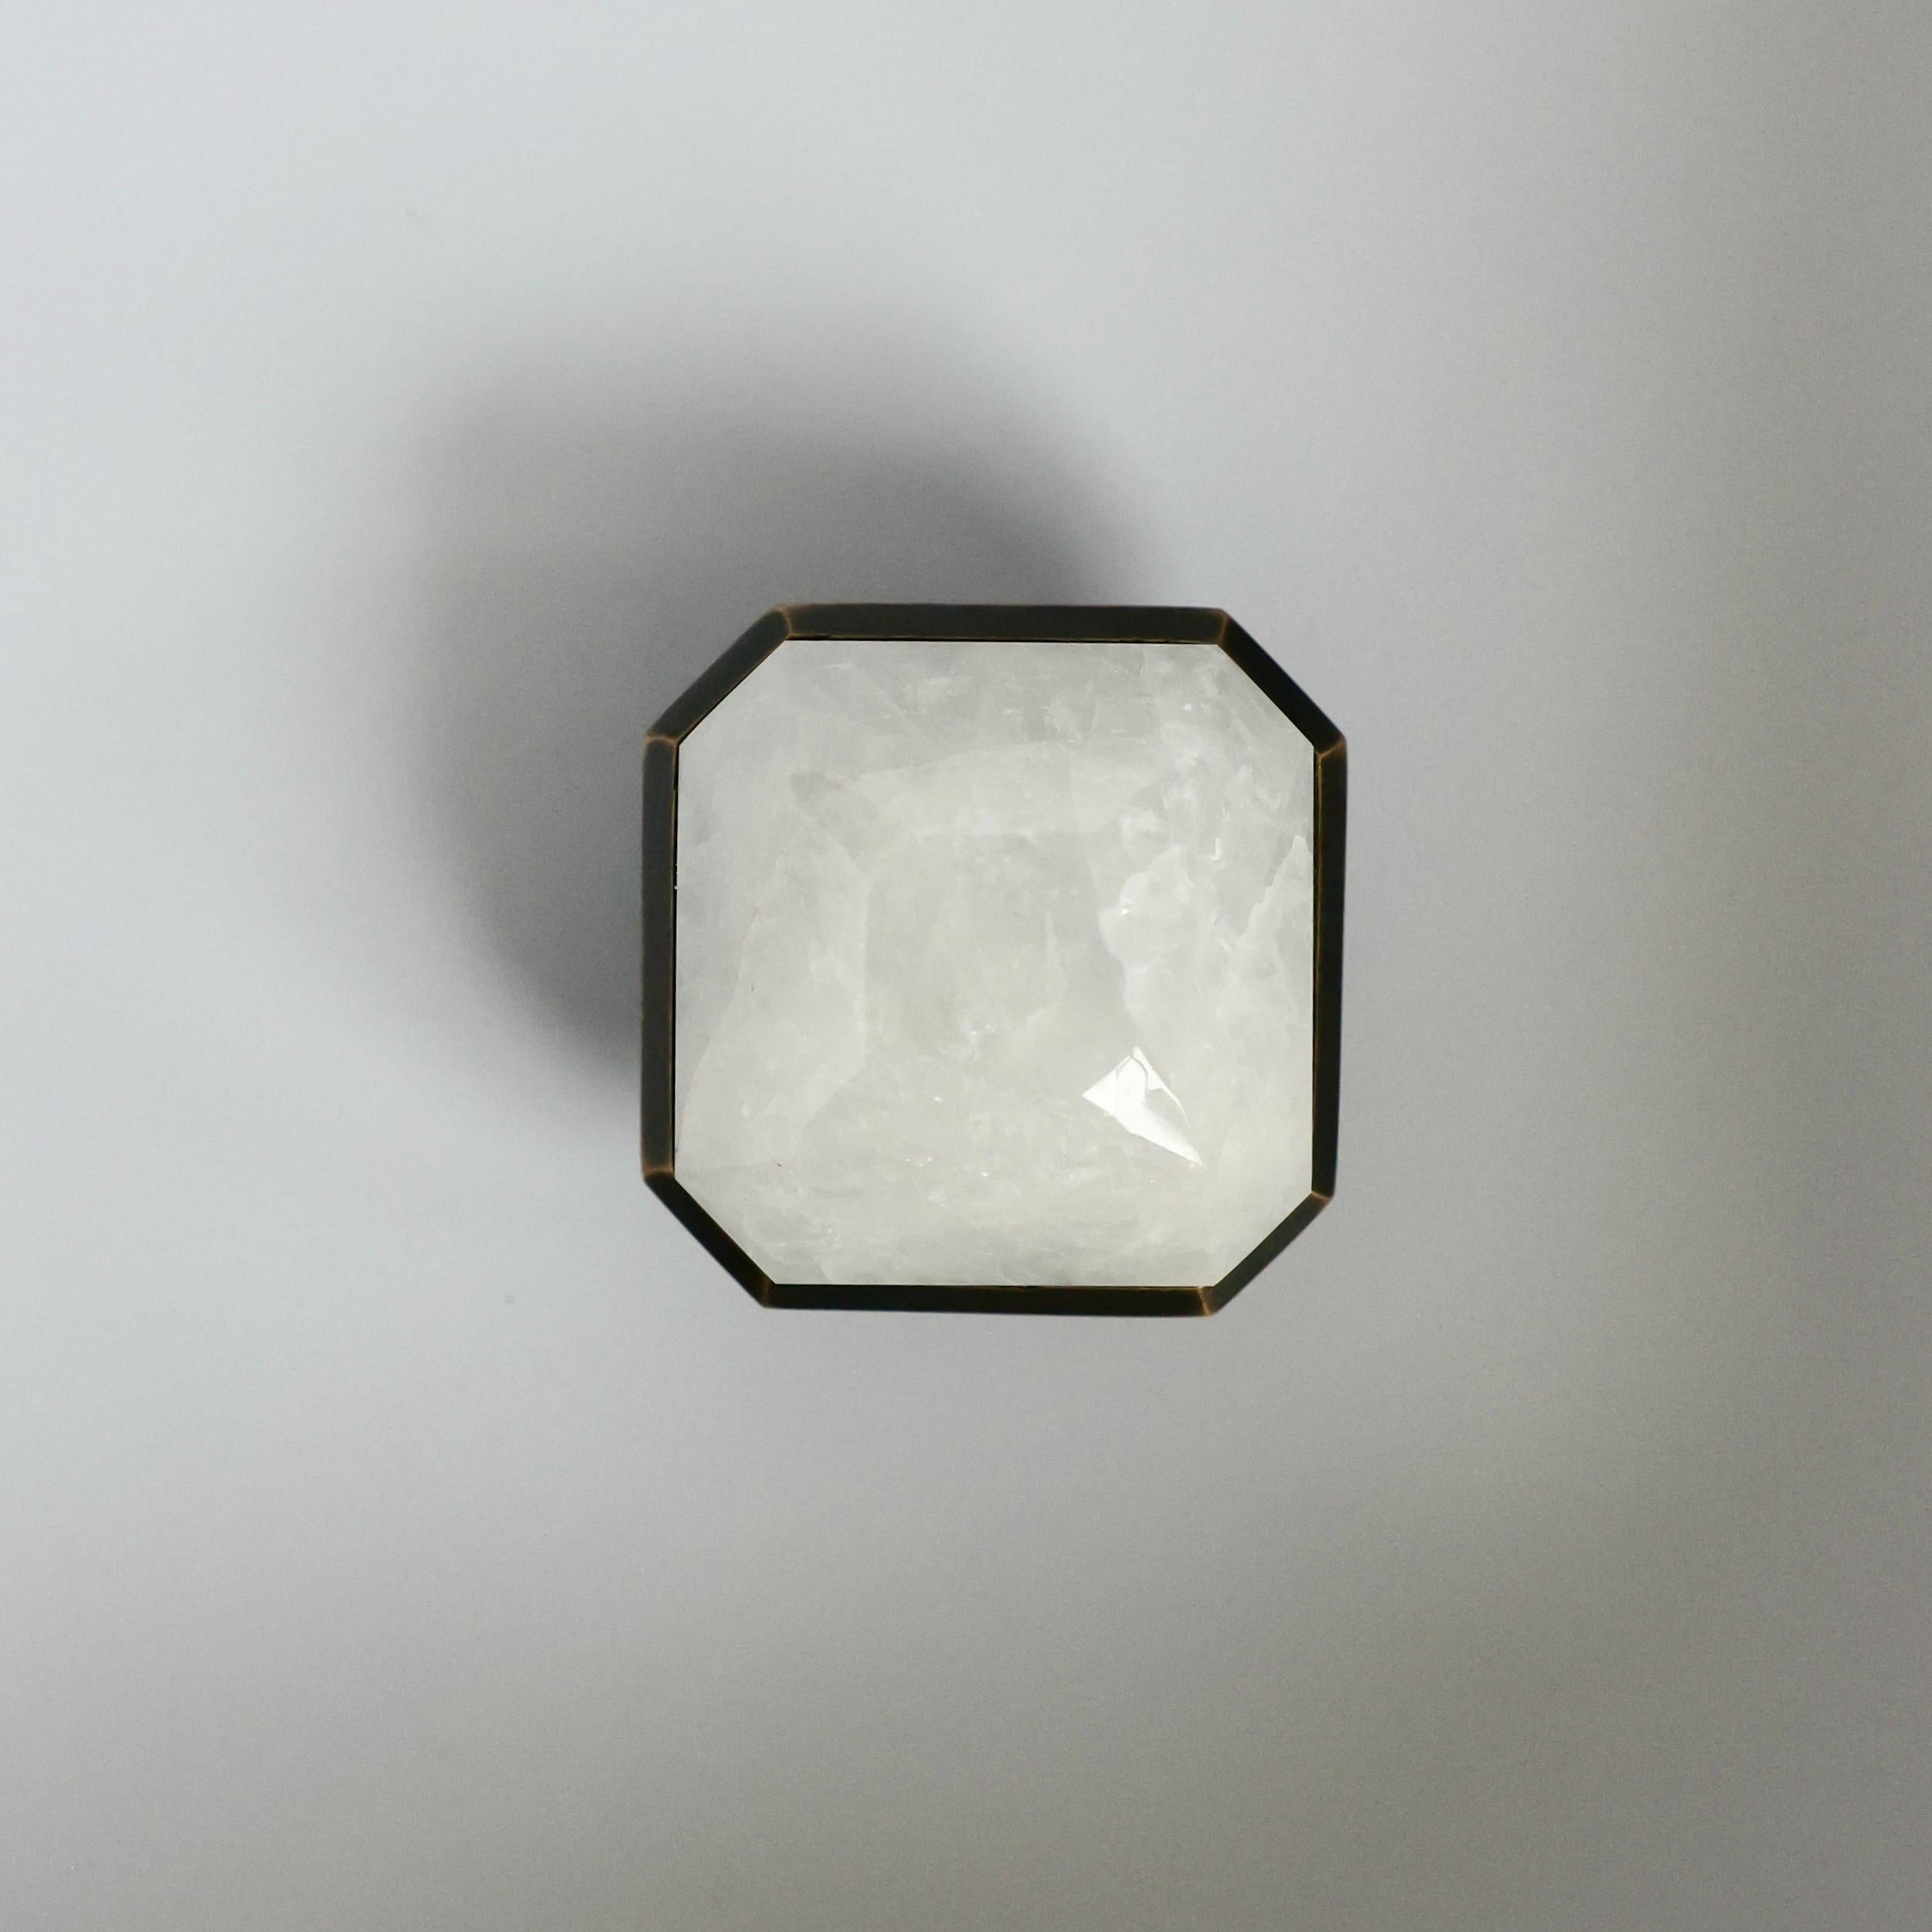 Diamond cut rock crystal knobs with polished brass decoration, created by Phoenix 

Metal finish and custom size upon request.
